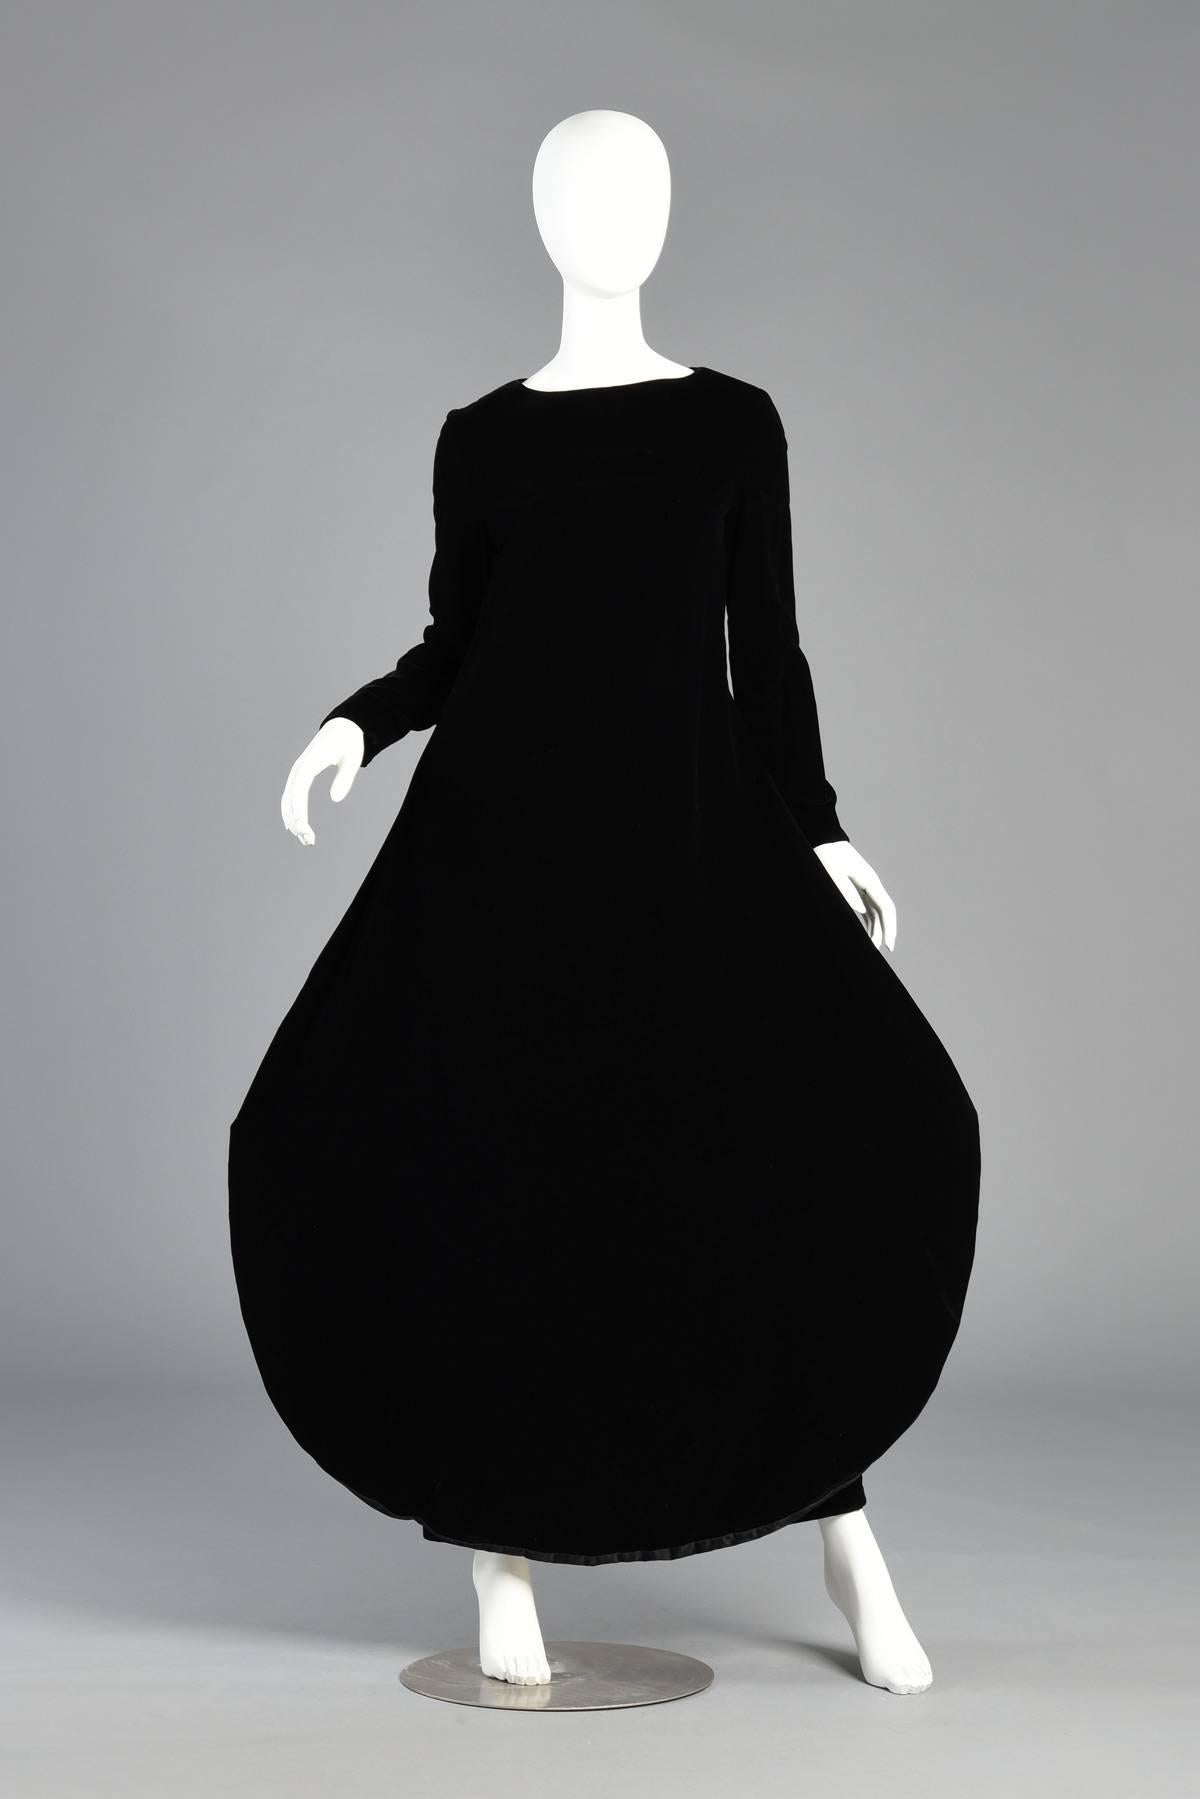 Iconic vintage apron paneled velvet maxi gown by Pierre Cardin, circa 1969-1971. Simple and demure black longsleeve velvet gown. Massive rounded “apron” panel creates a striking silhouette. Excellent vintage condition. Classic Cardin. Magazine photo